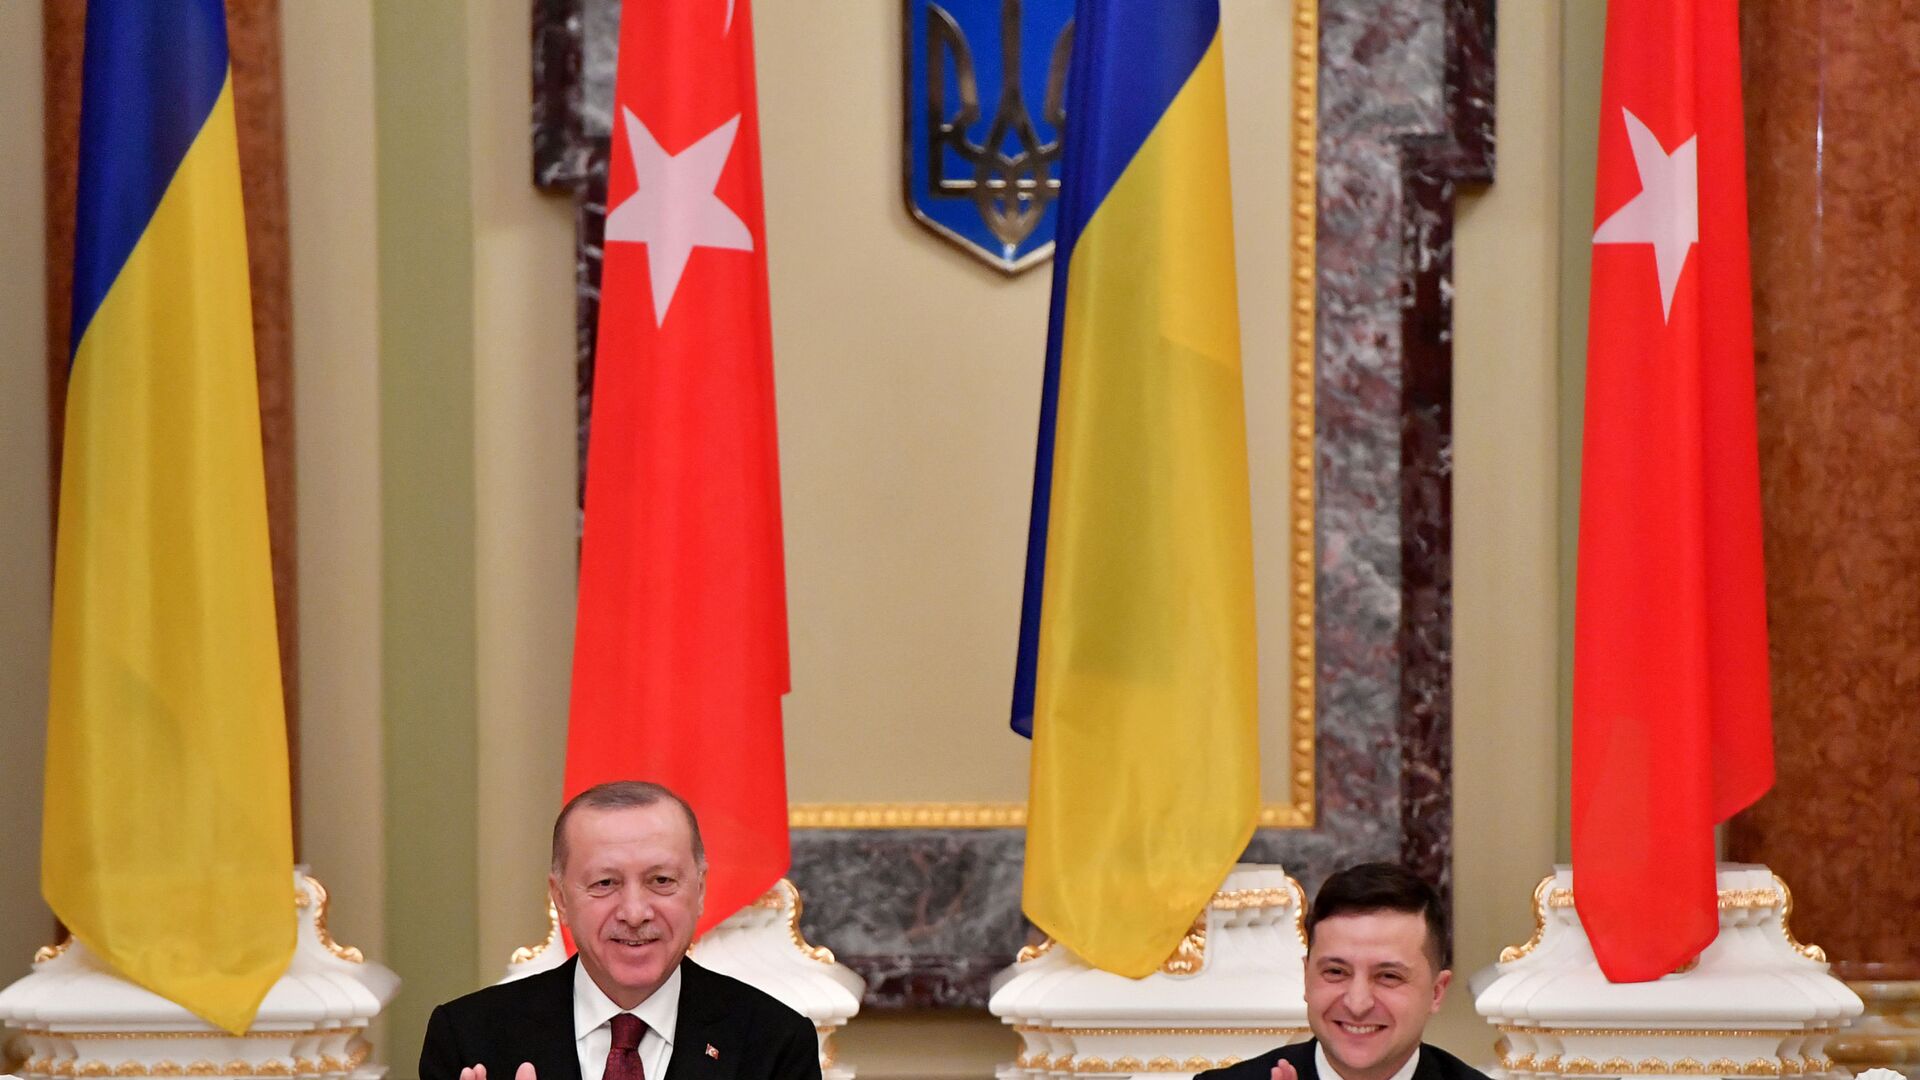 Ukrainian President Volodymyr Zelensky and his Turkish counterpart Recep Tayyip Erdogan react during a joint press conference following their meeting in Kiev on February 3, 2020. (Photo by Sergei SUPINSKY / AFP) - اسپوتنیک افغانستان  , 1920, 31.05.2022